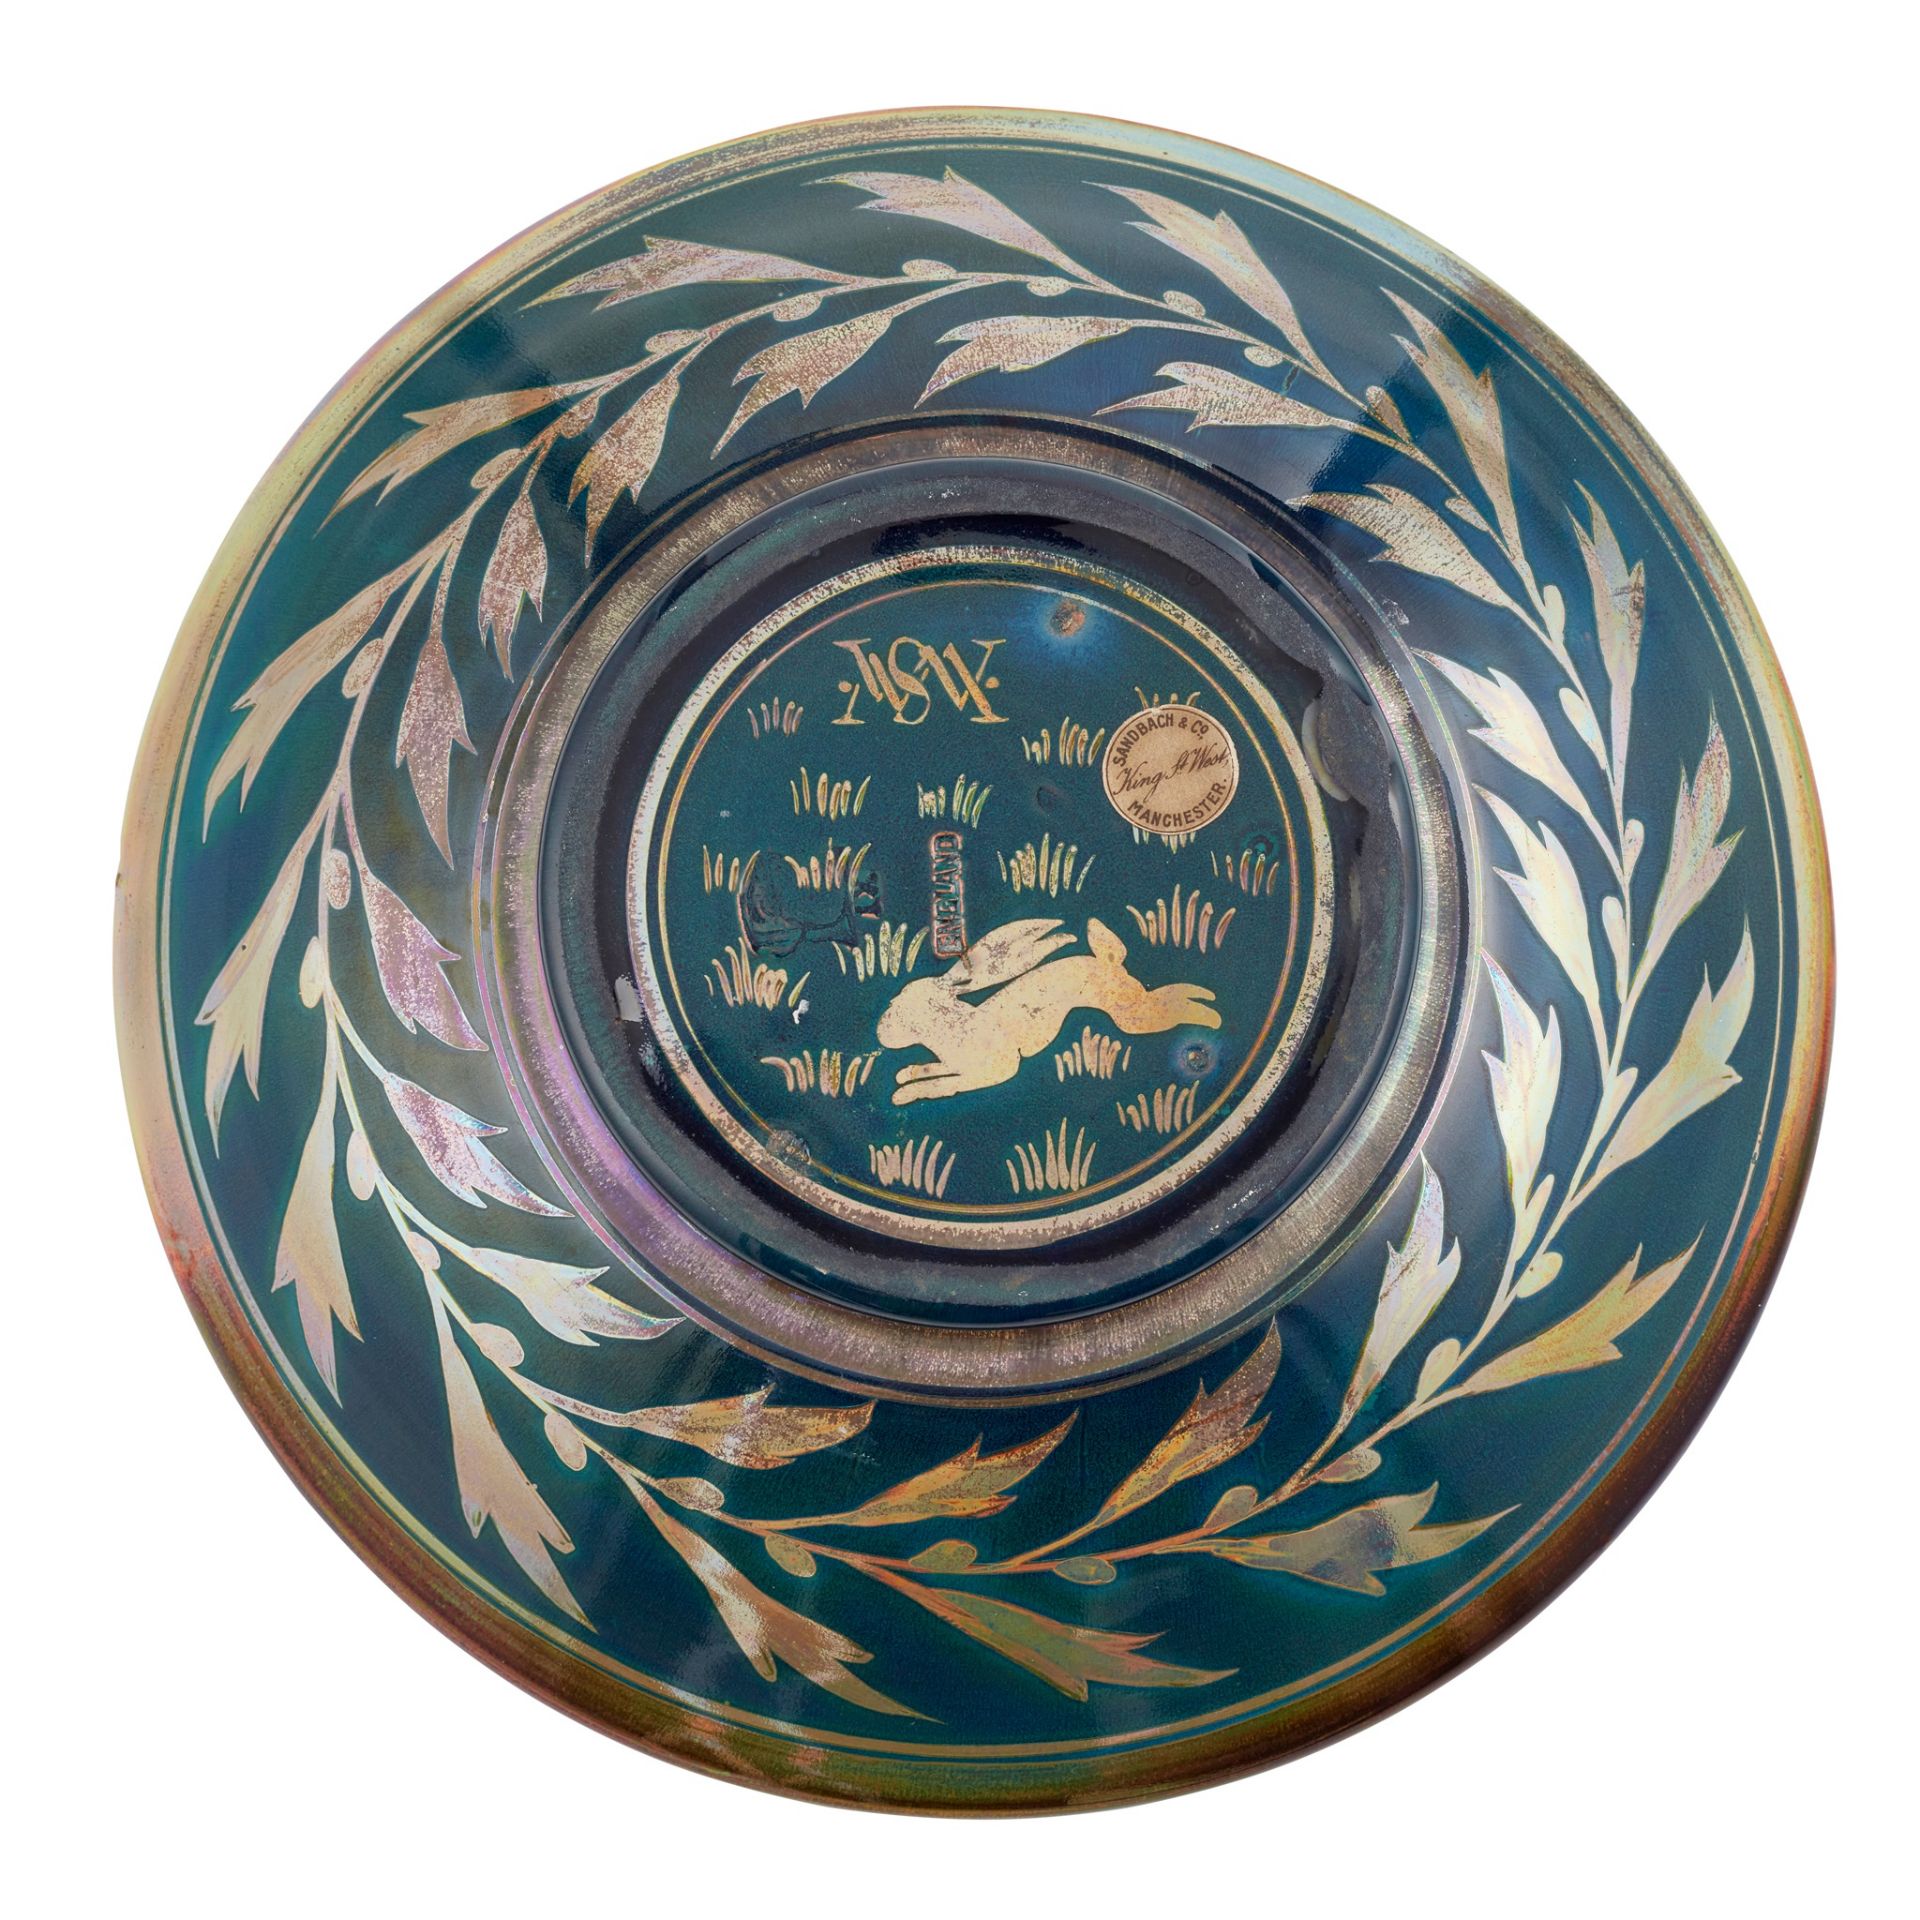 WILLIAM S. MYCOCK (1872-1950) FOR PILKINGTON’S TILE & POTTERY CO. LUSTRE CHARGER, DATED 1910 - Image 2 of 3